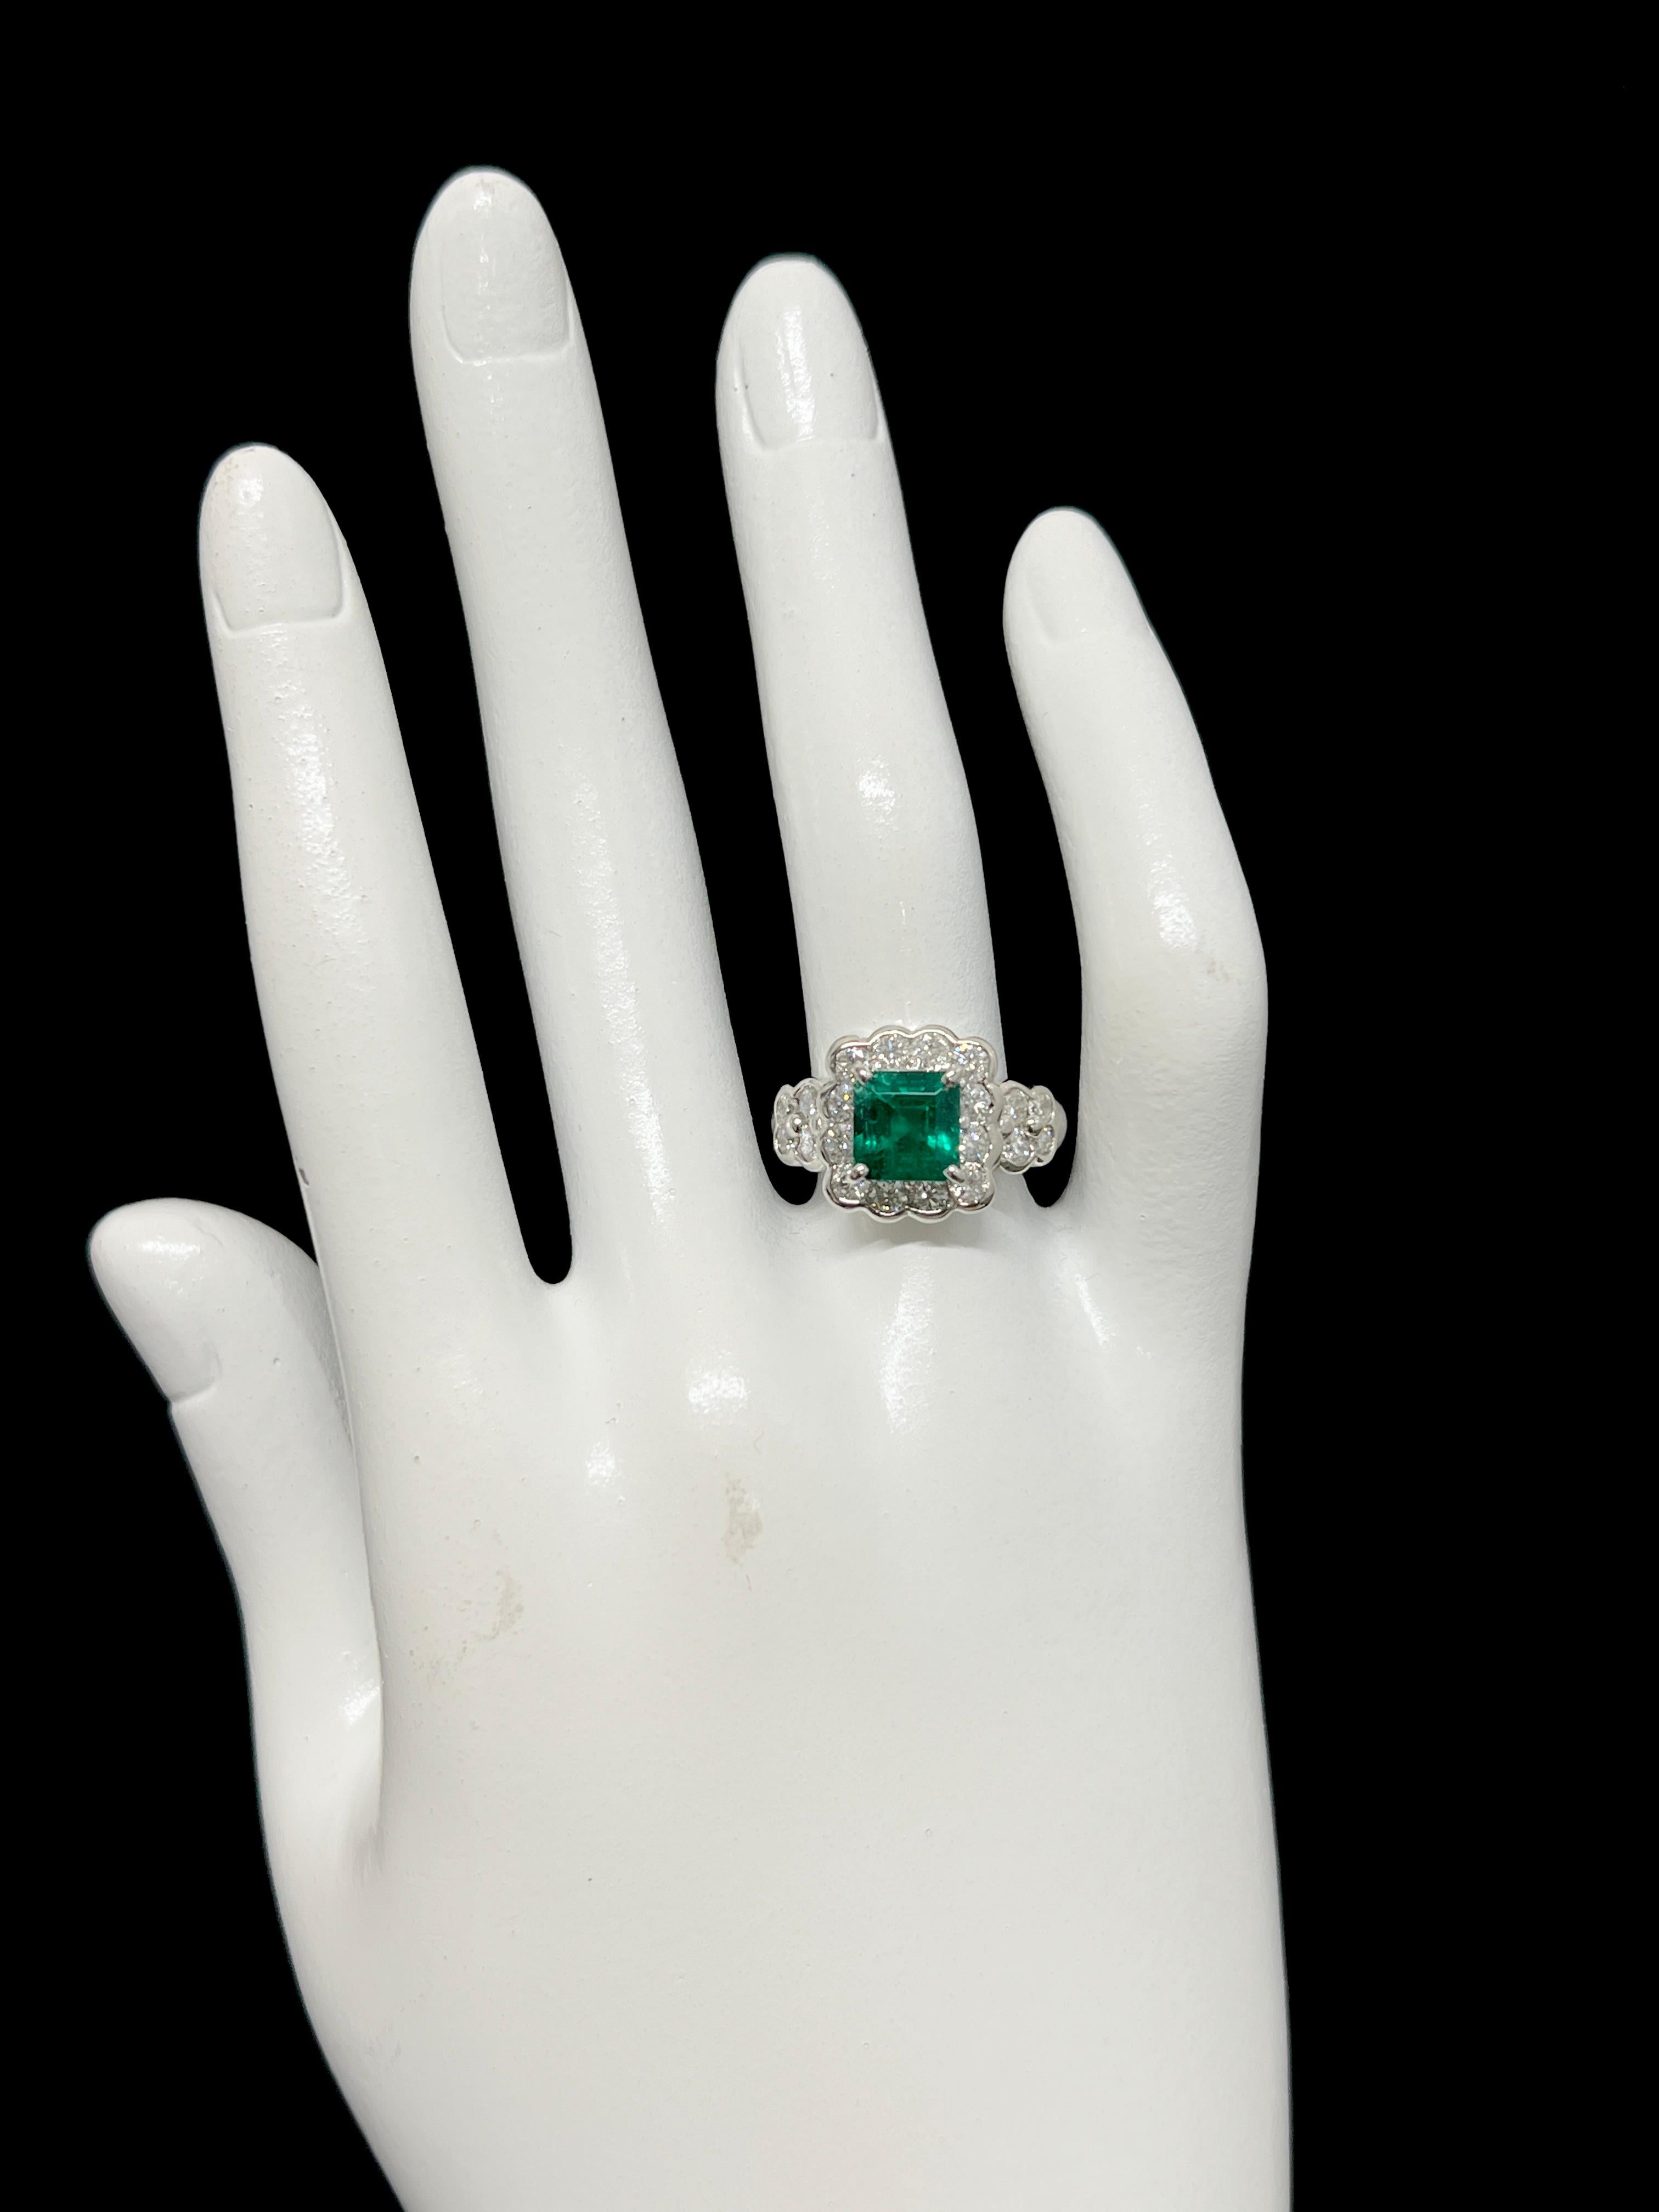 GIA Certified 1.87 Carat, Colombian, Muzo Green Emerald Ring set in Platinum For Sale 1